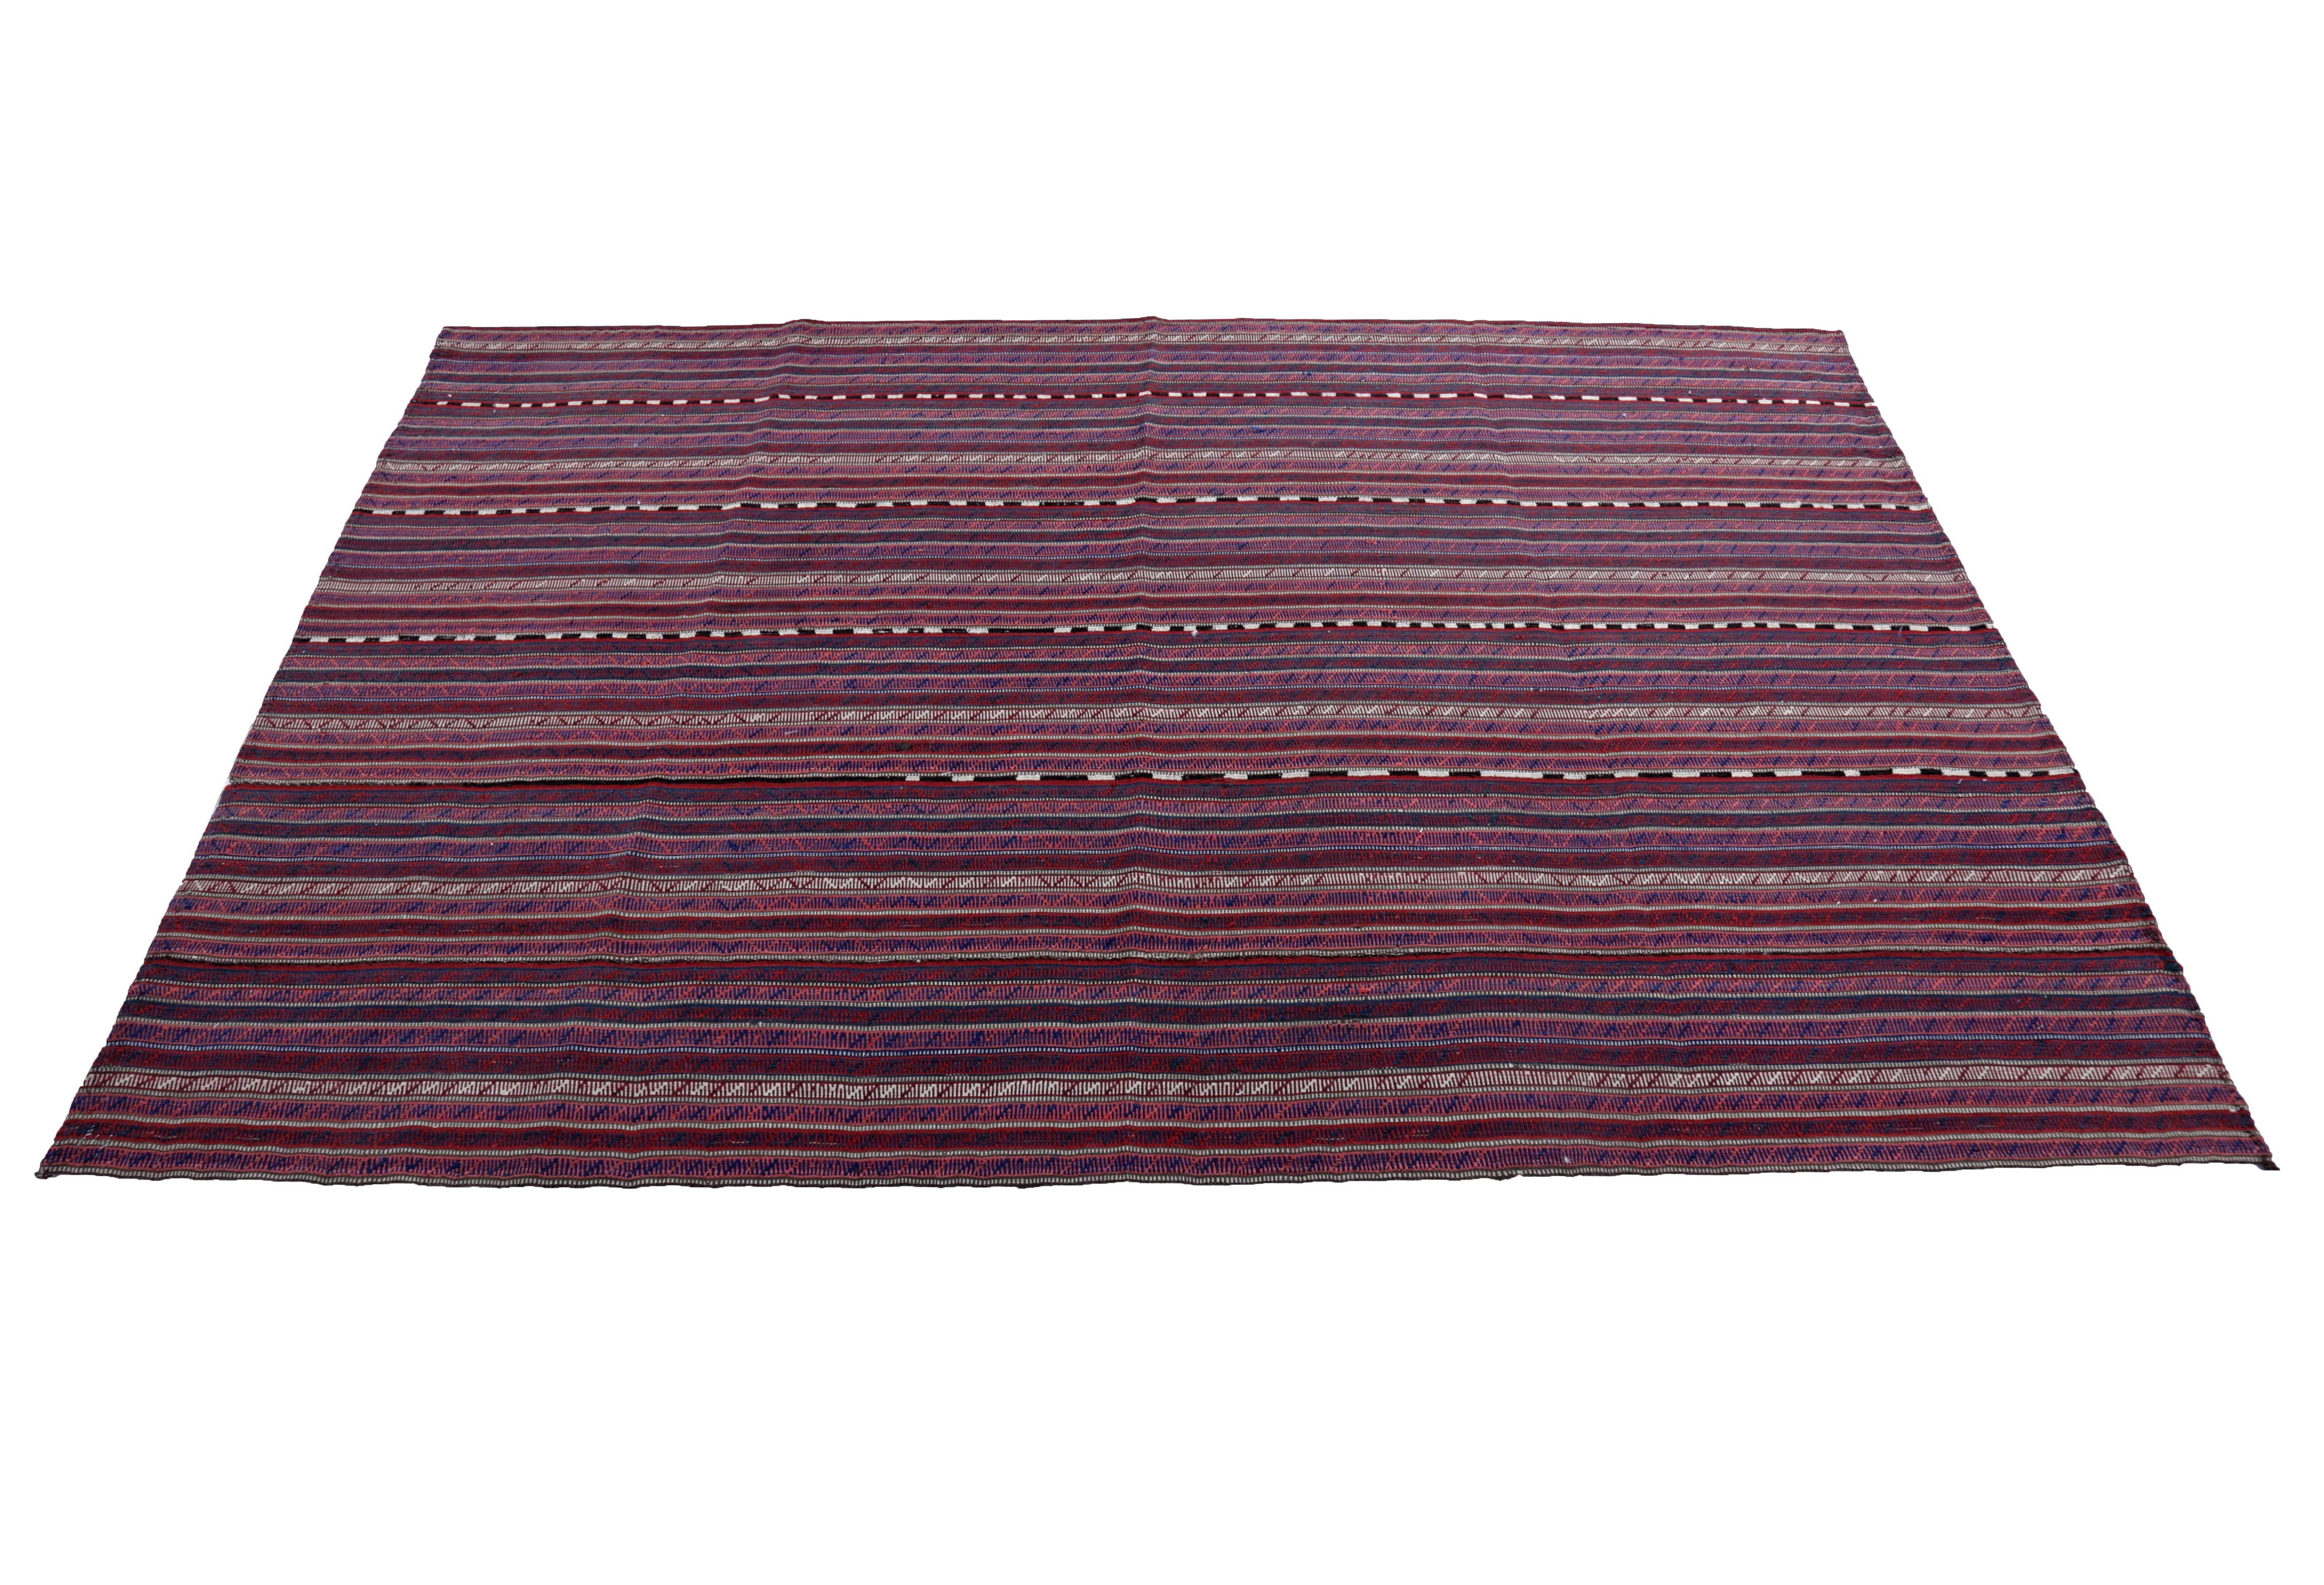 Turkish rug handwoven from the finest sheep’s wool and colored with all-natural vegetable dyes that are safe for humans and pets. It’s a traditional Kilim flat-weave design featuring red, pink, and white stripes. It’s a stunning piece to get for